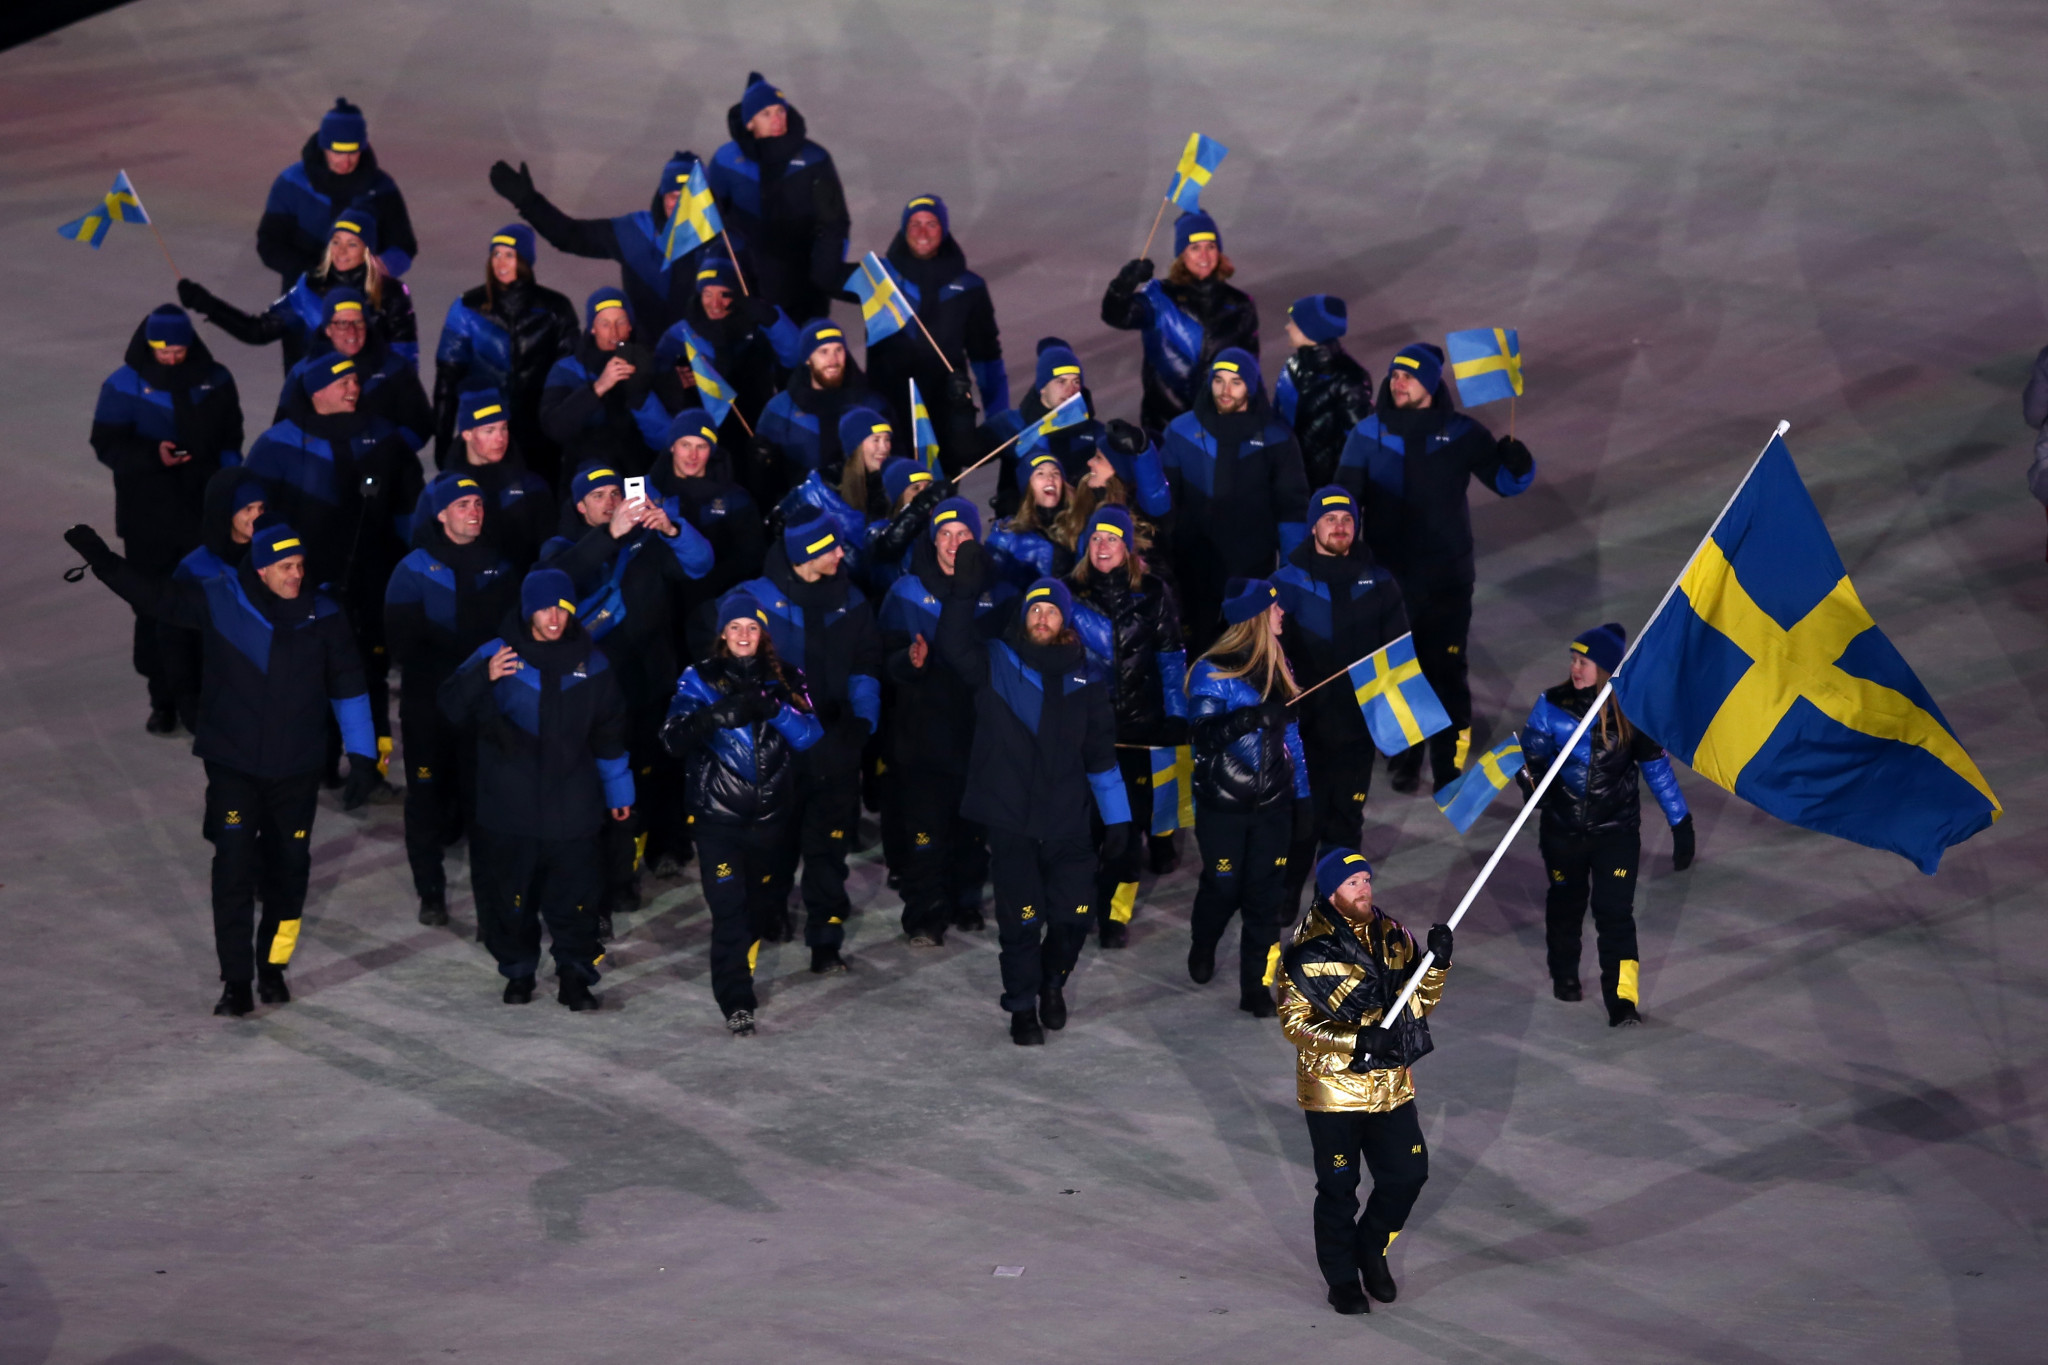 Sweden begins preparations for 2026 and 2030 Winter Olympics with investment drive